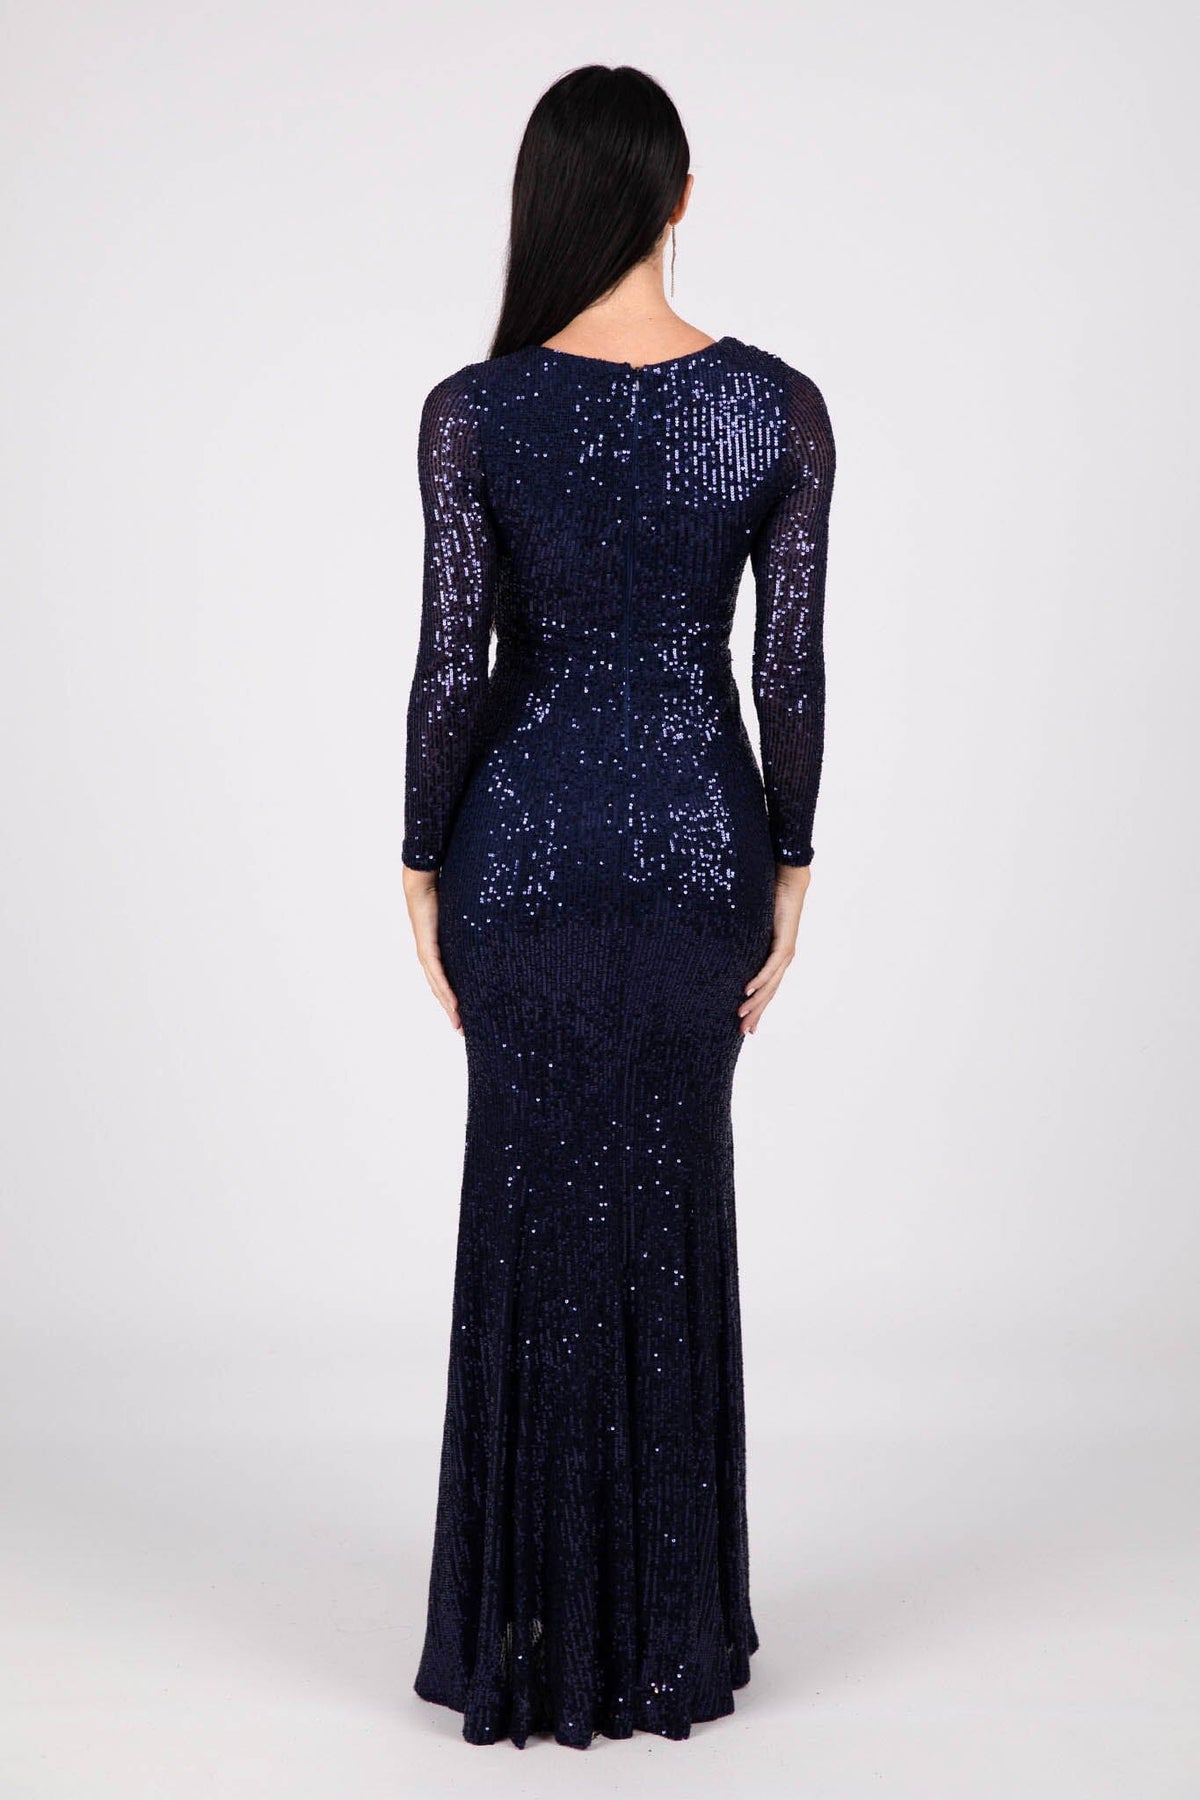 Closed Back Design of Navy Deep Blue Sequin Long Sleeve Fitted Evening Maxi Dress with V Neckline, Column Silhouette and Side Split